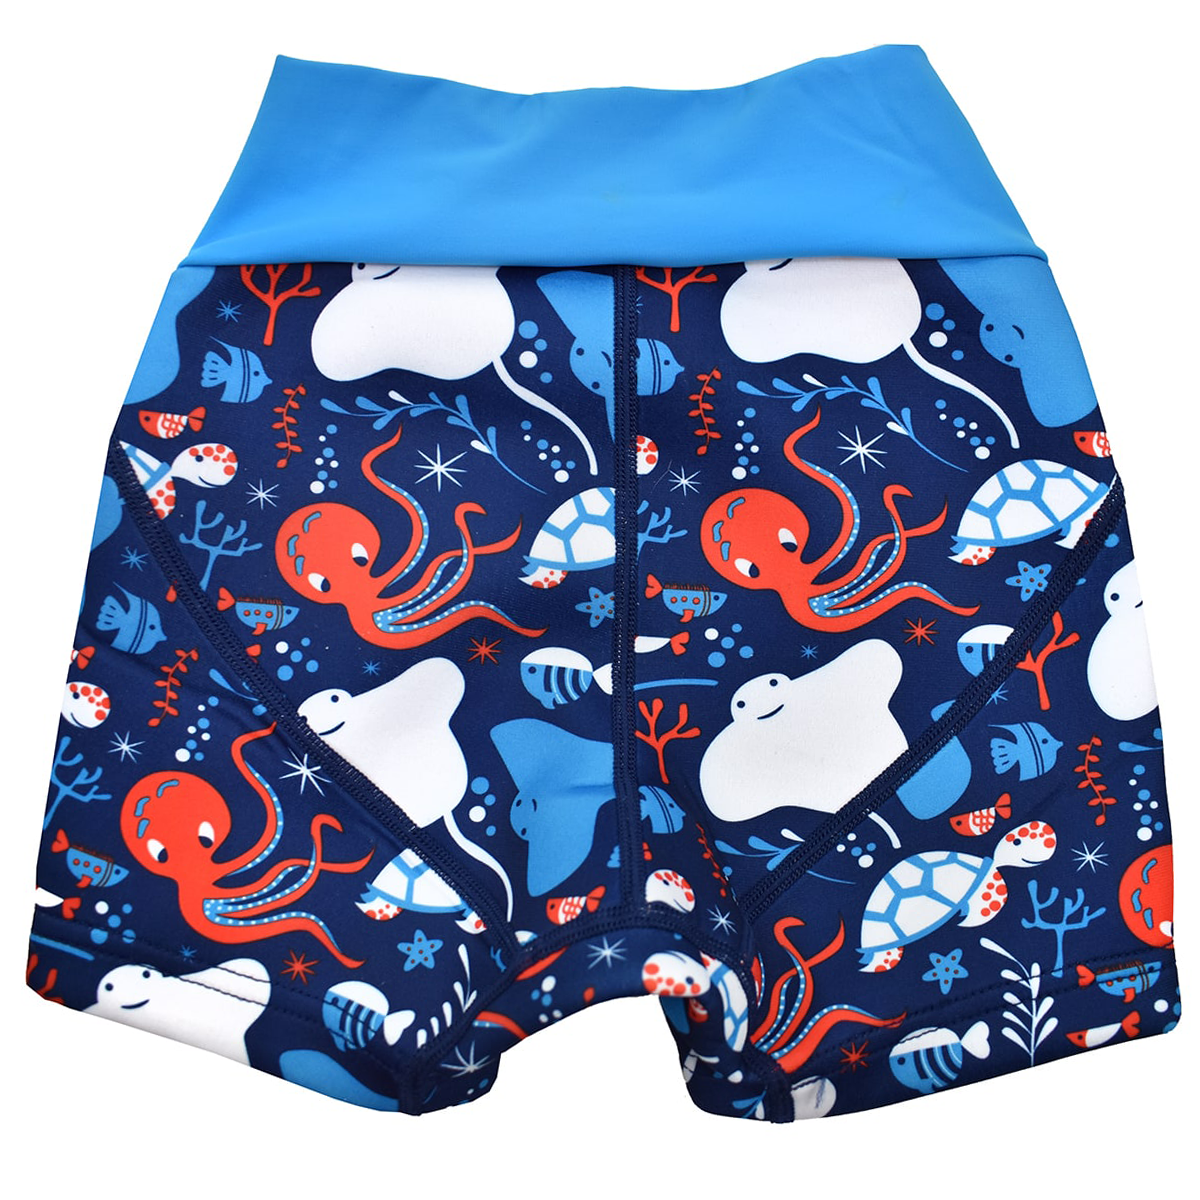 Neoprene swim shorts in navy blue with blue waist and under the sea themed print, including octopus, turtles, fish, stingray and more. Back.